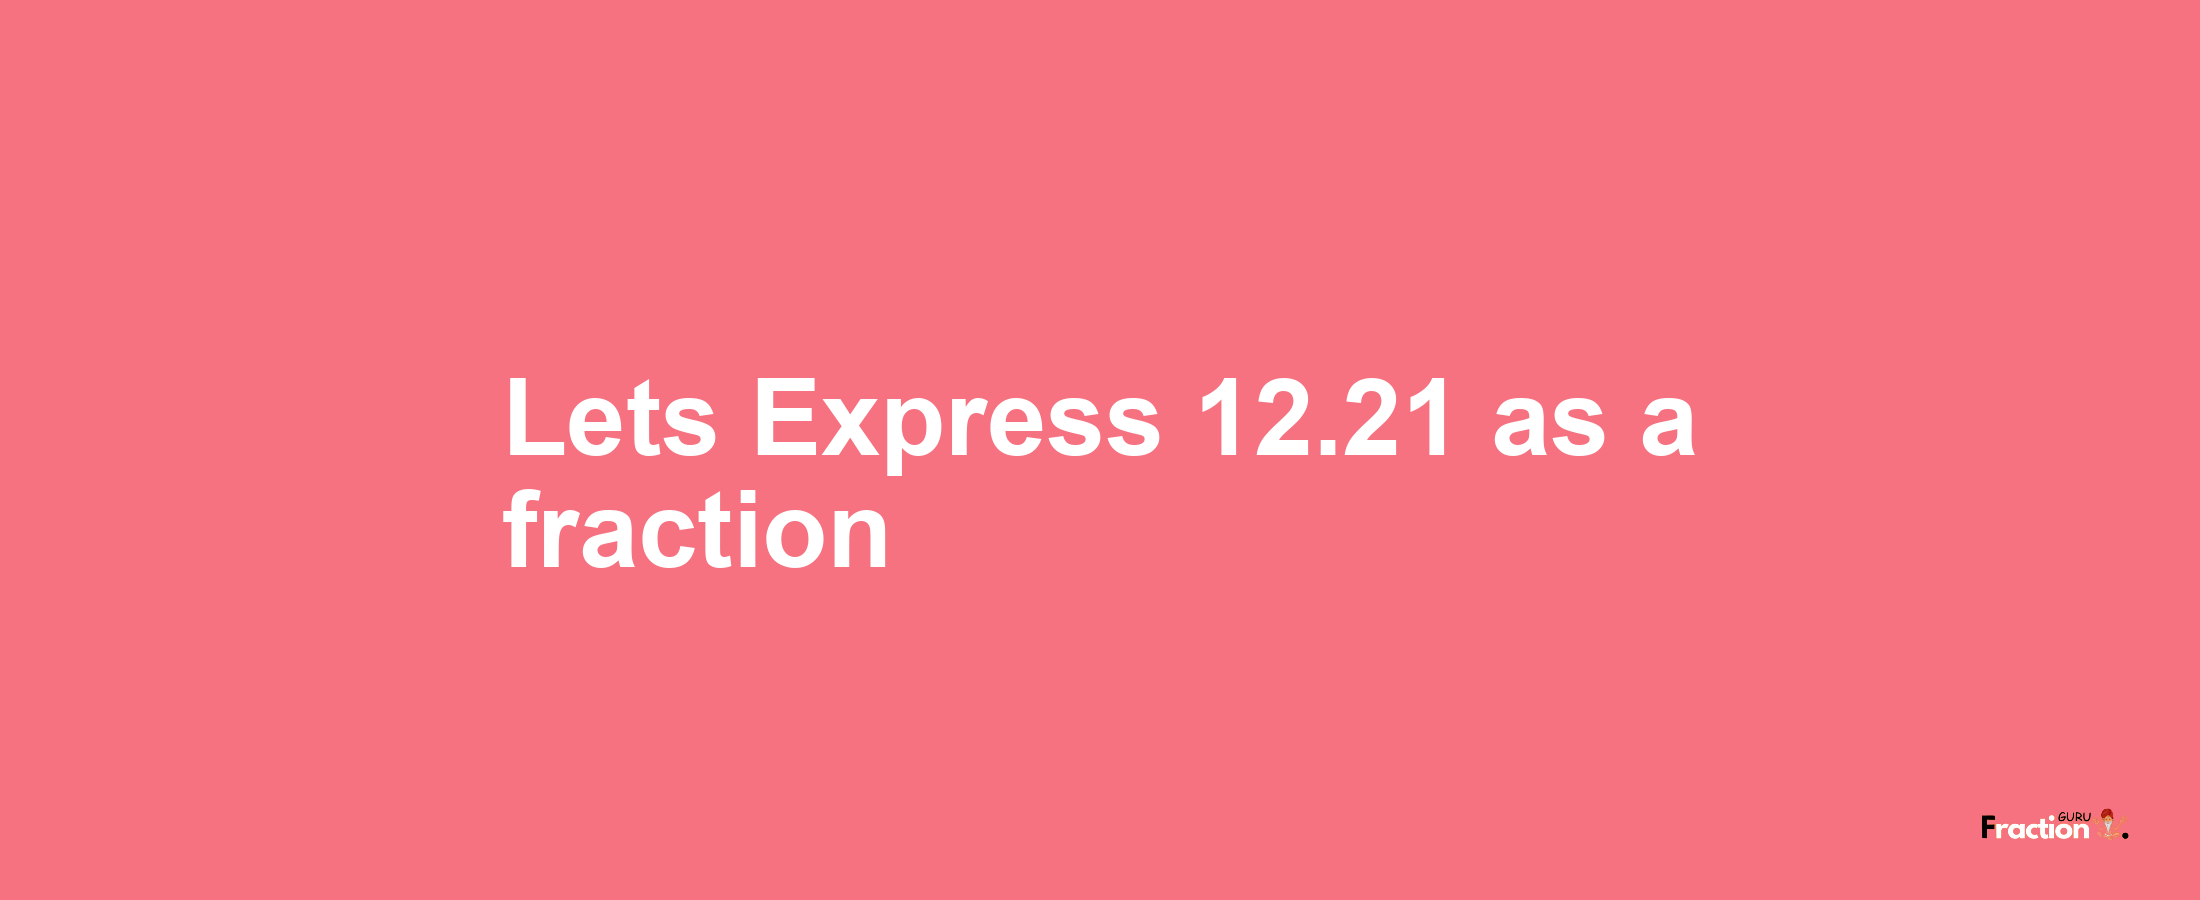 Lets Express 12.21 as afraction